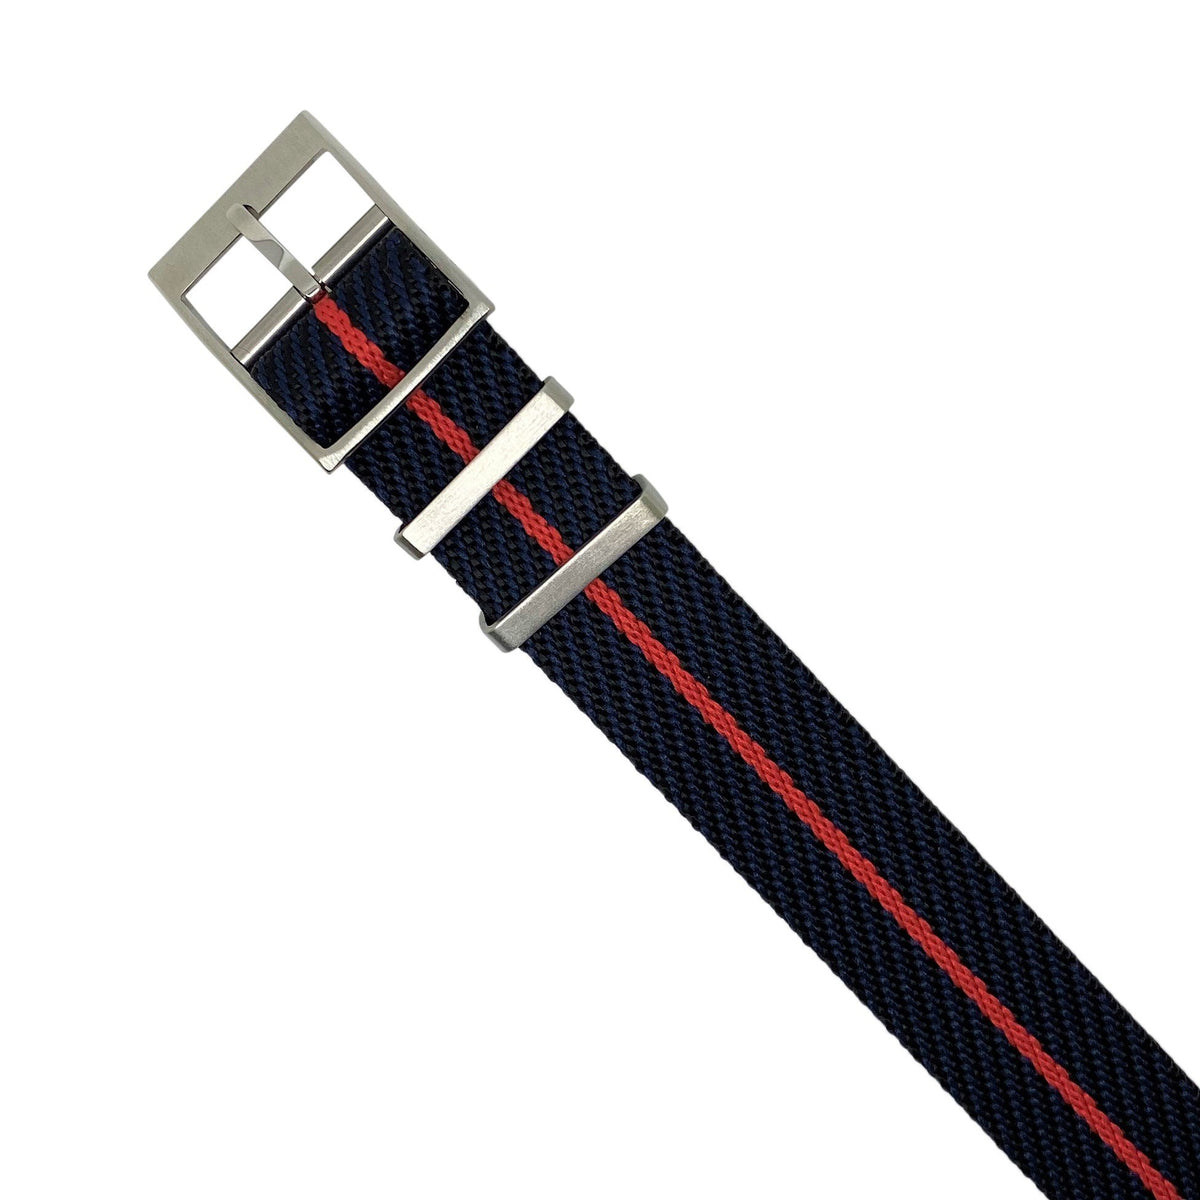 Lux Single Pass Strap in Navy Red with Silver Buckle (20mm) - Nomad Watch Works Malaysia